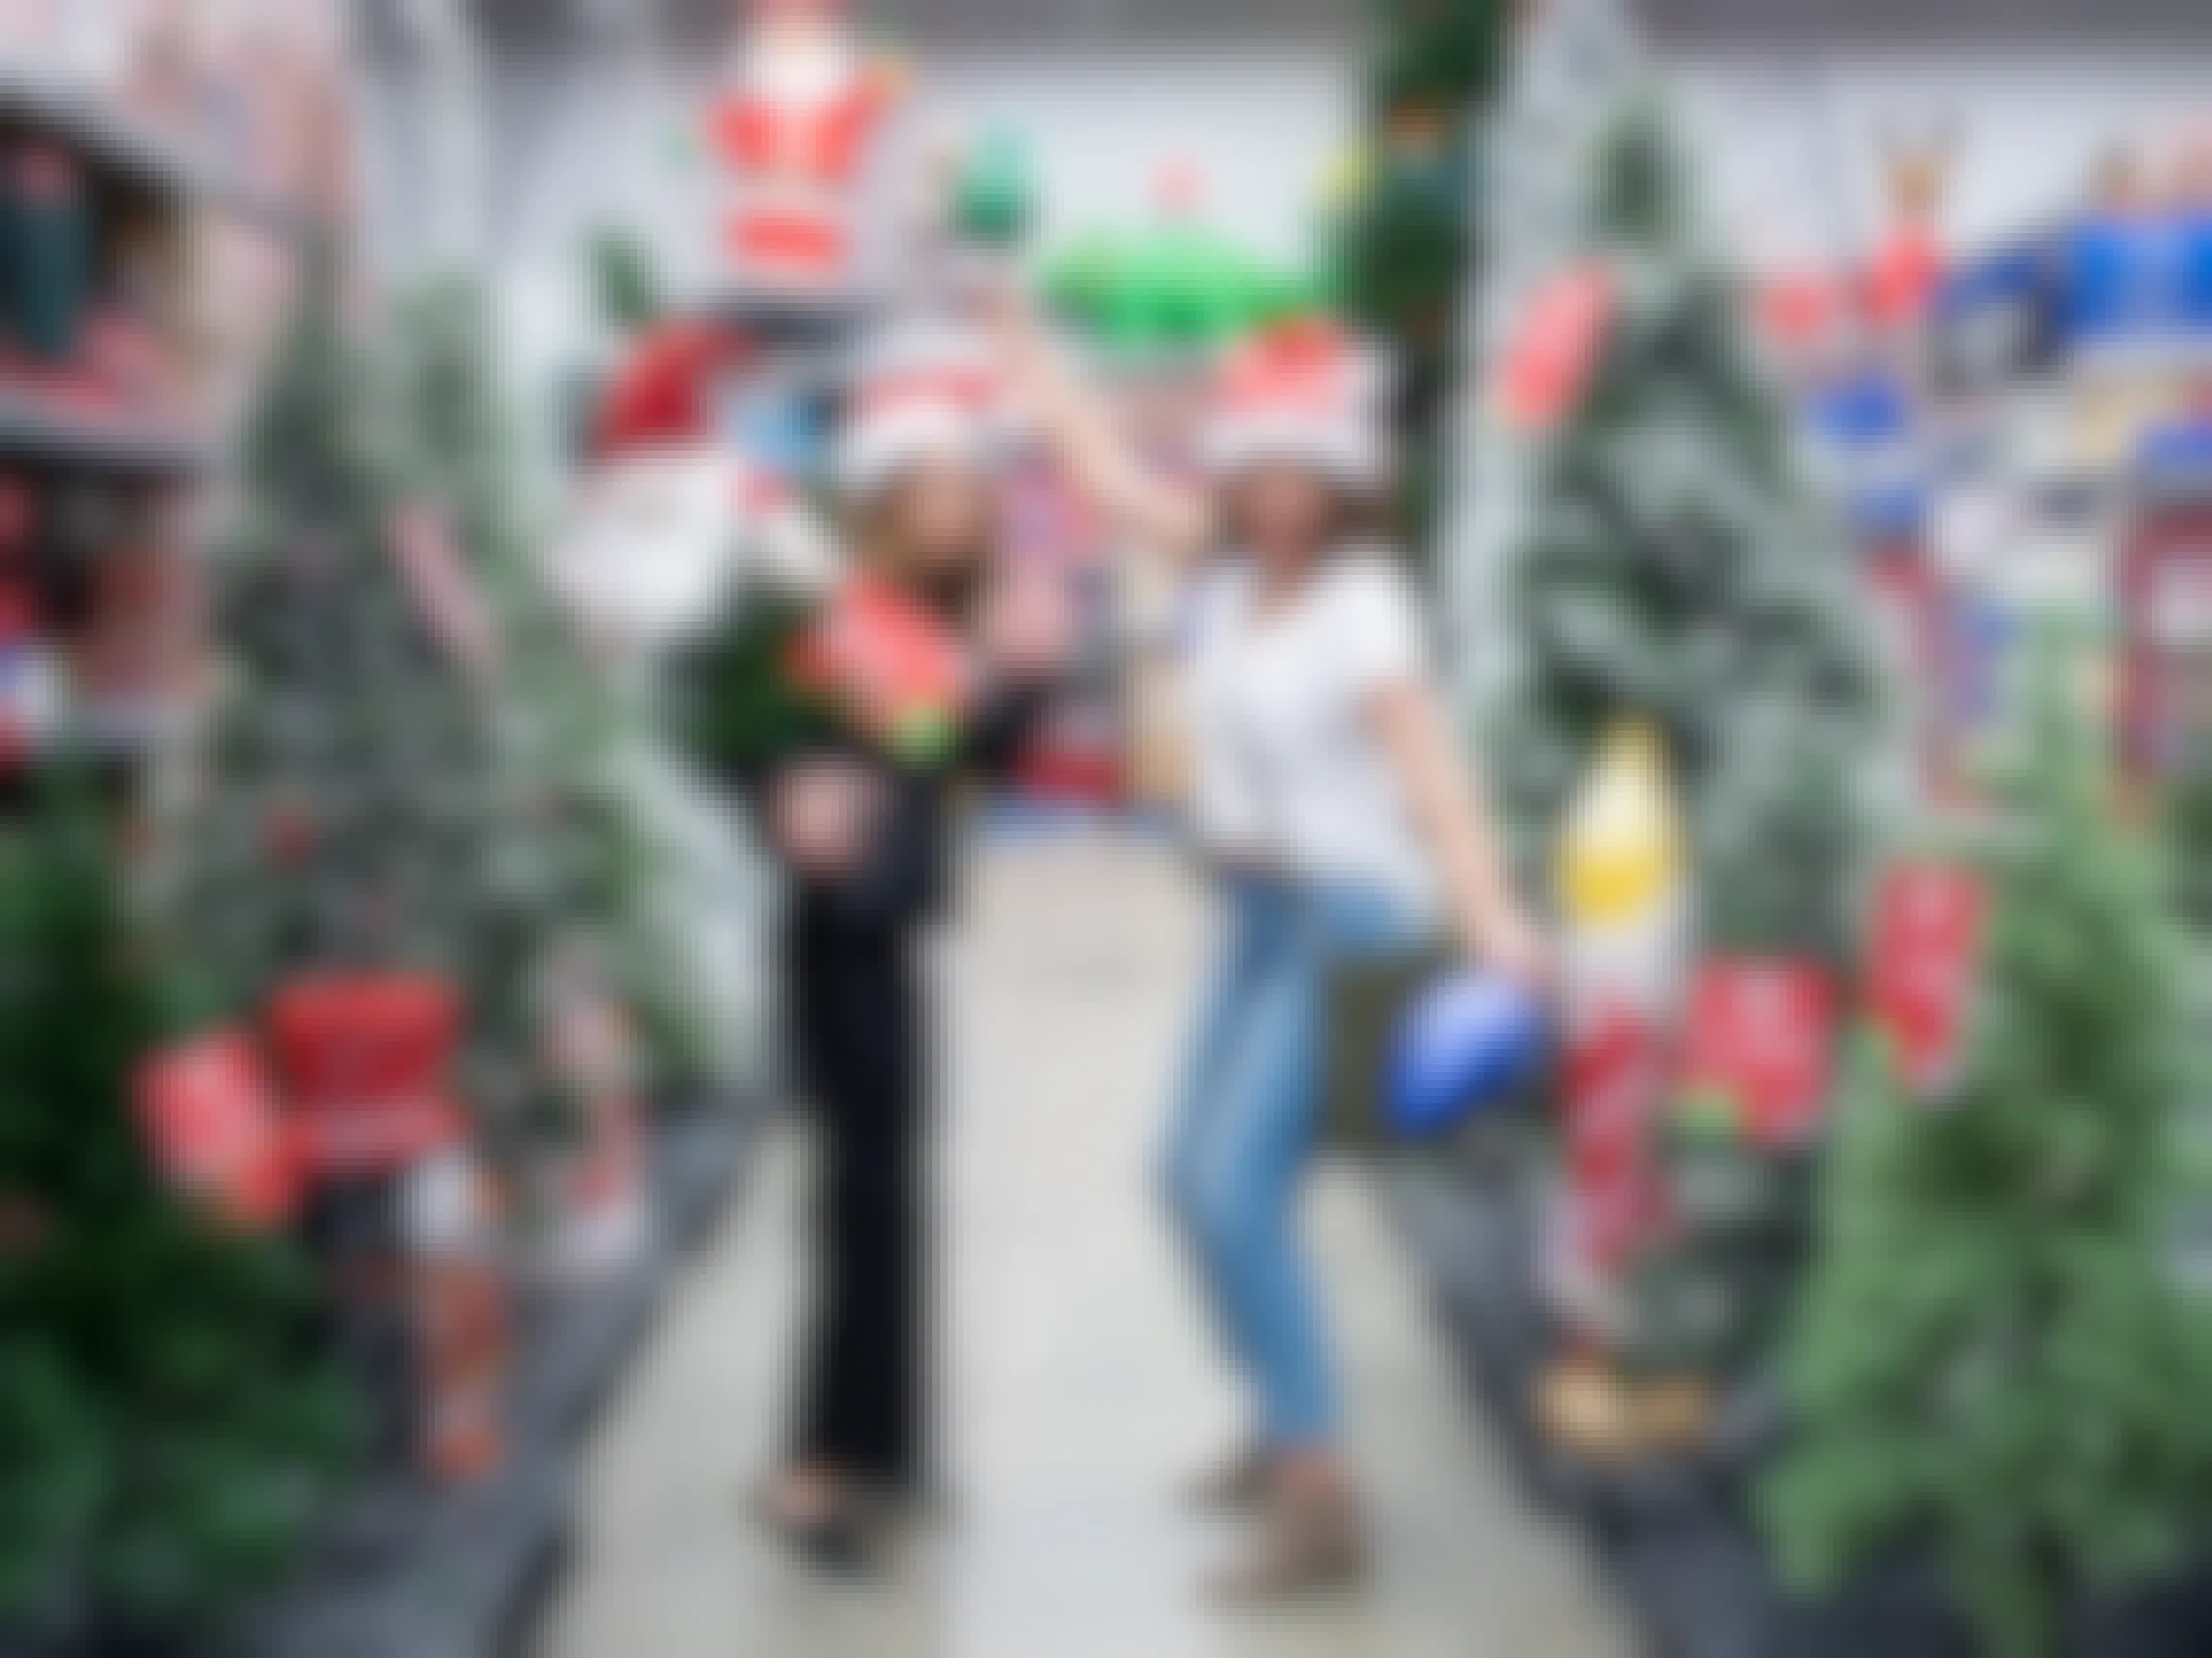 Two people shopping for Christmas items in Walmart